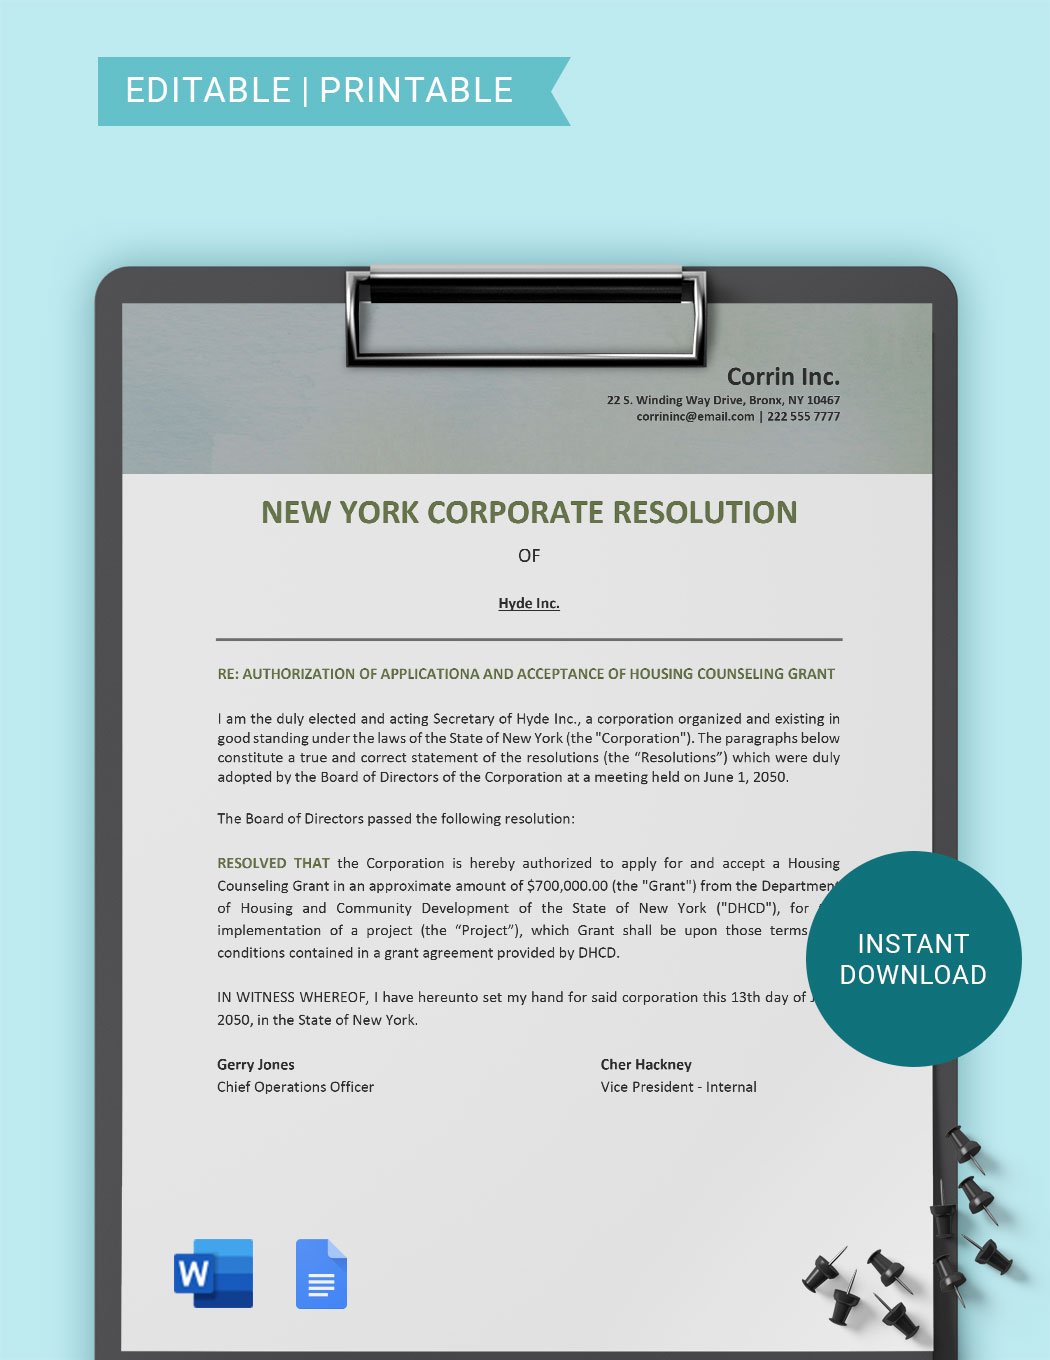 New York Corporate Resolution Template in Word, Google Docs